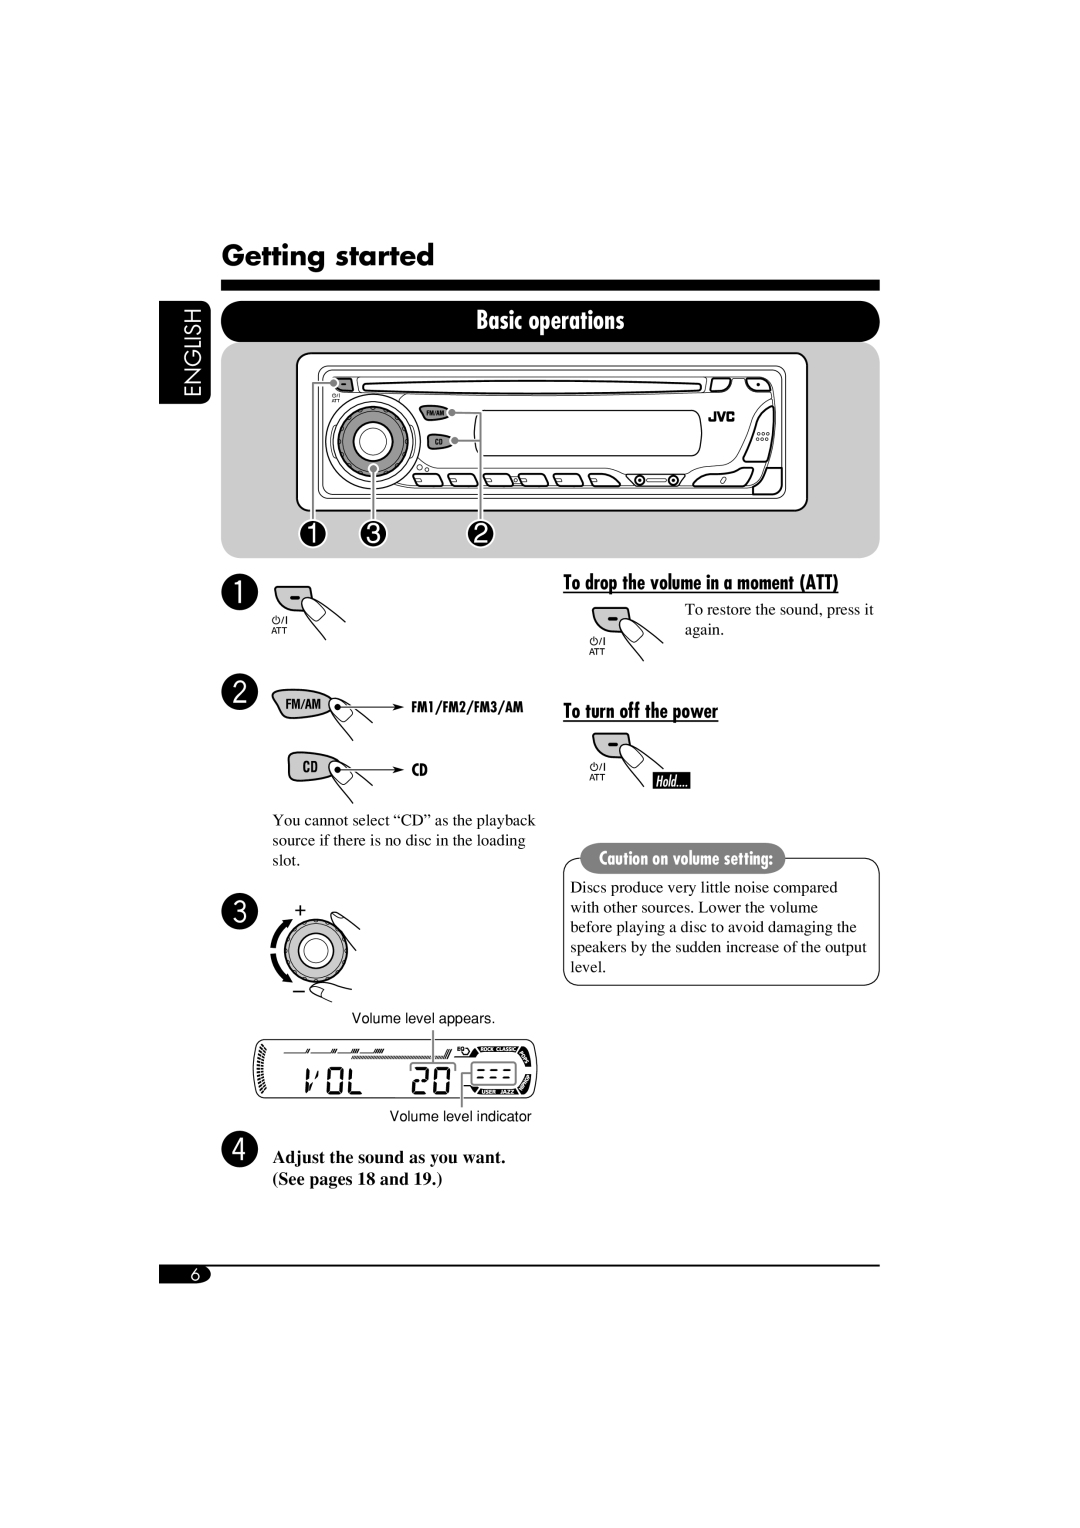 JVC KD-G411 Getting started, Basic operations, To turn off the power, ⁄Adjust the sound as you want. See pages 18 and 